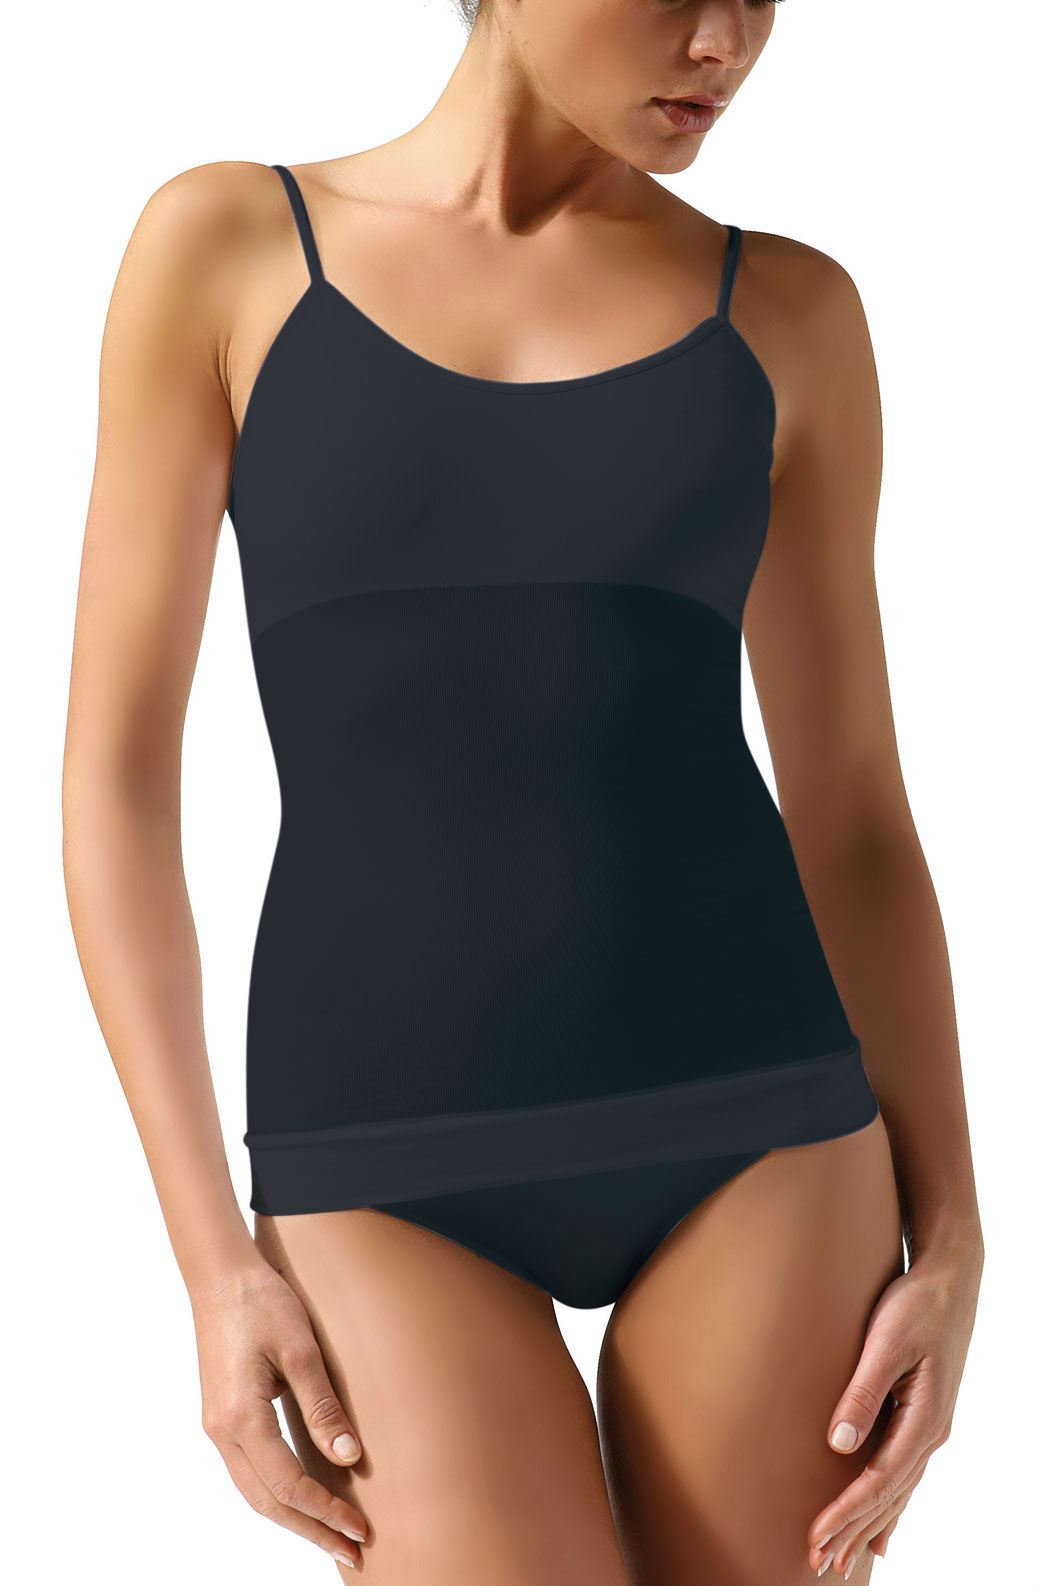 Control Body Shaping Camisole Sort L/XL – –: Sort – Black, –: Large/X-Large